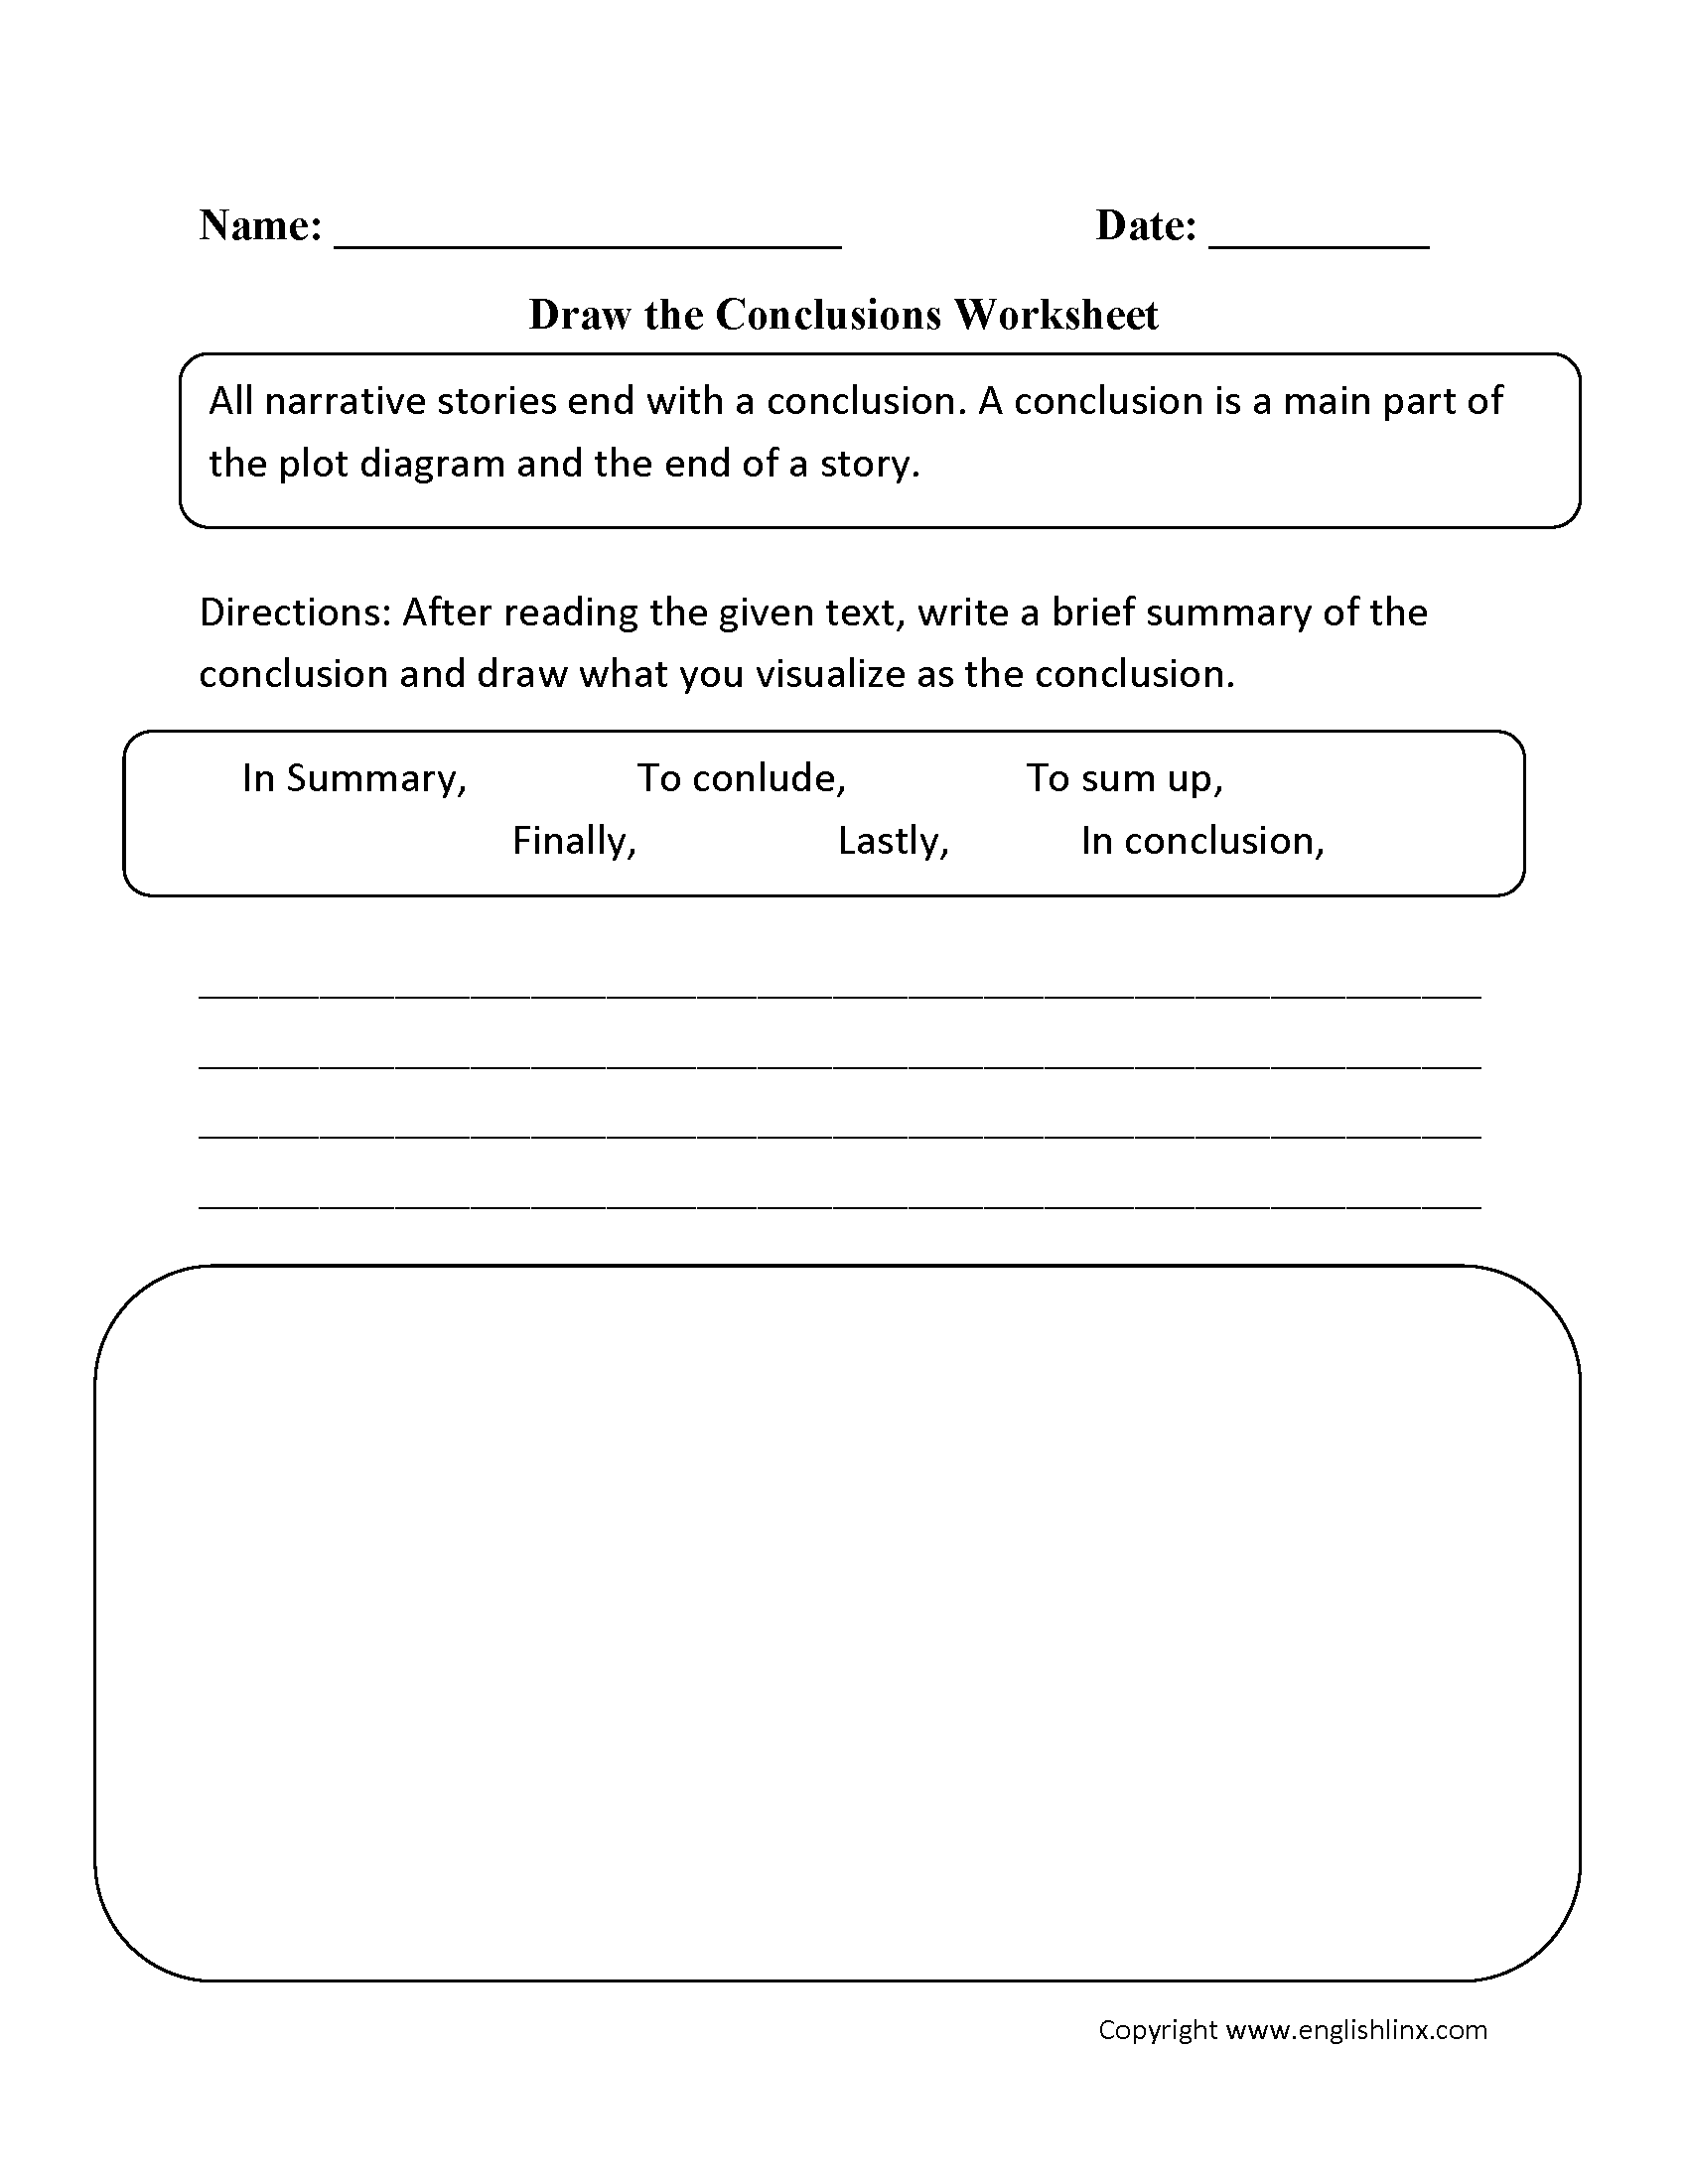 Draw the Conclusions Worksheet